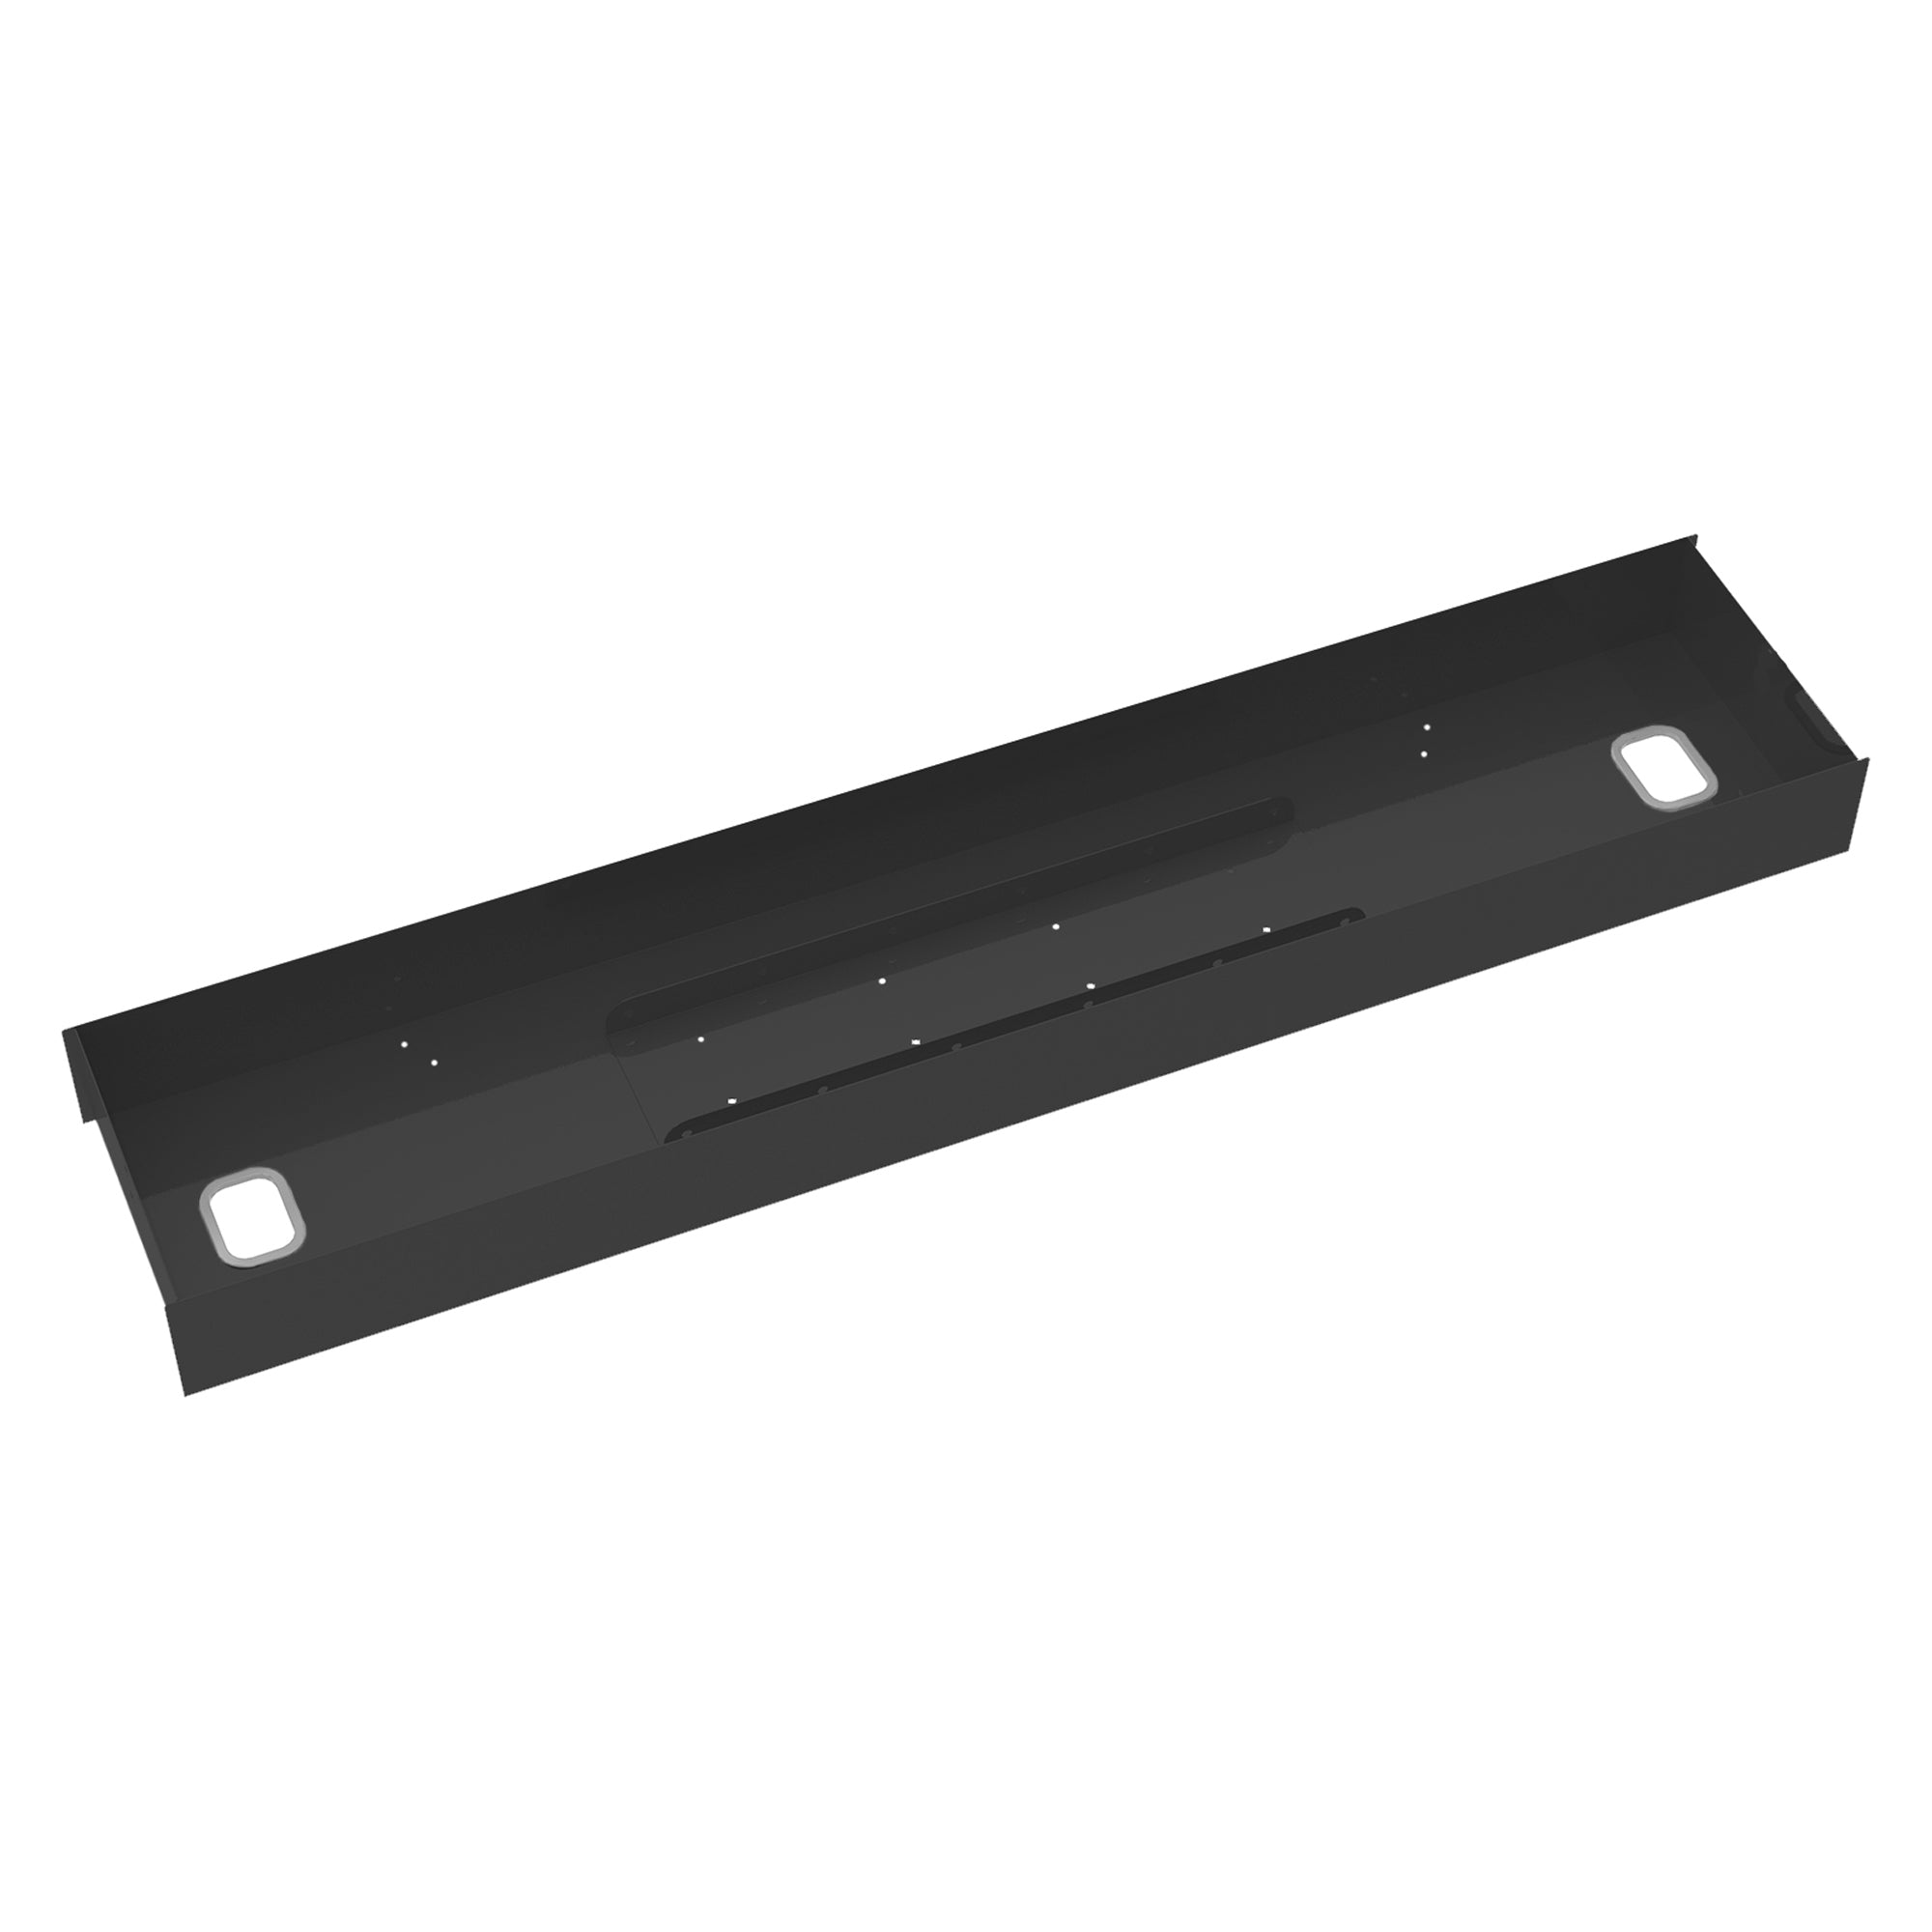 Elev8 lower cable channel with cover for back-to-back desks - Office Products Online